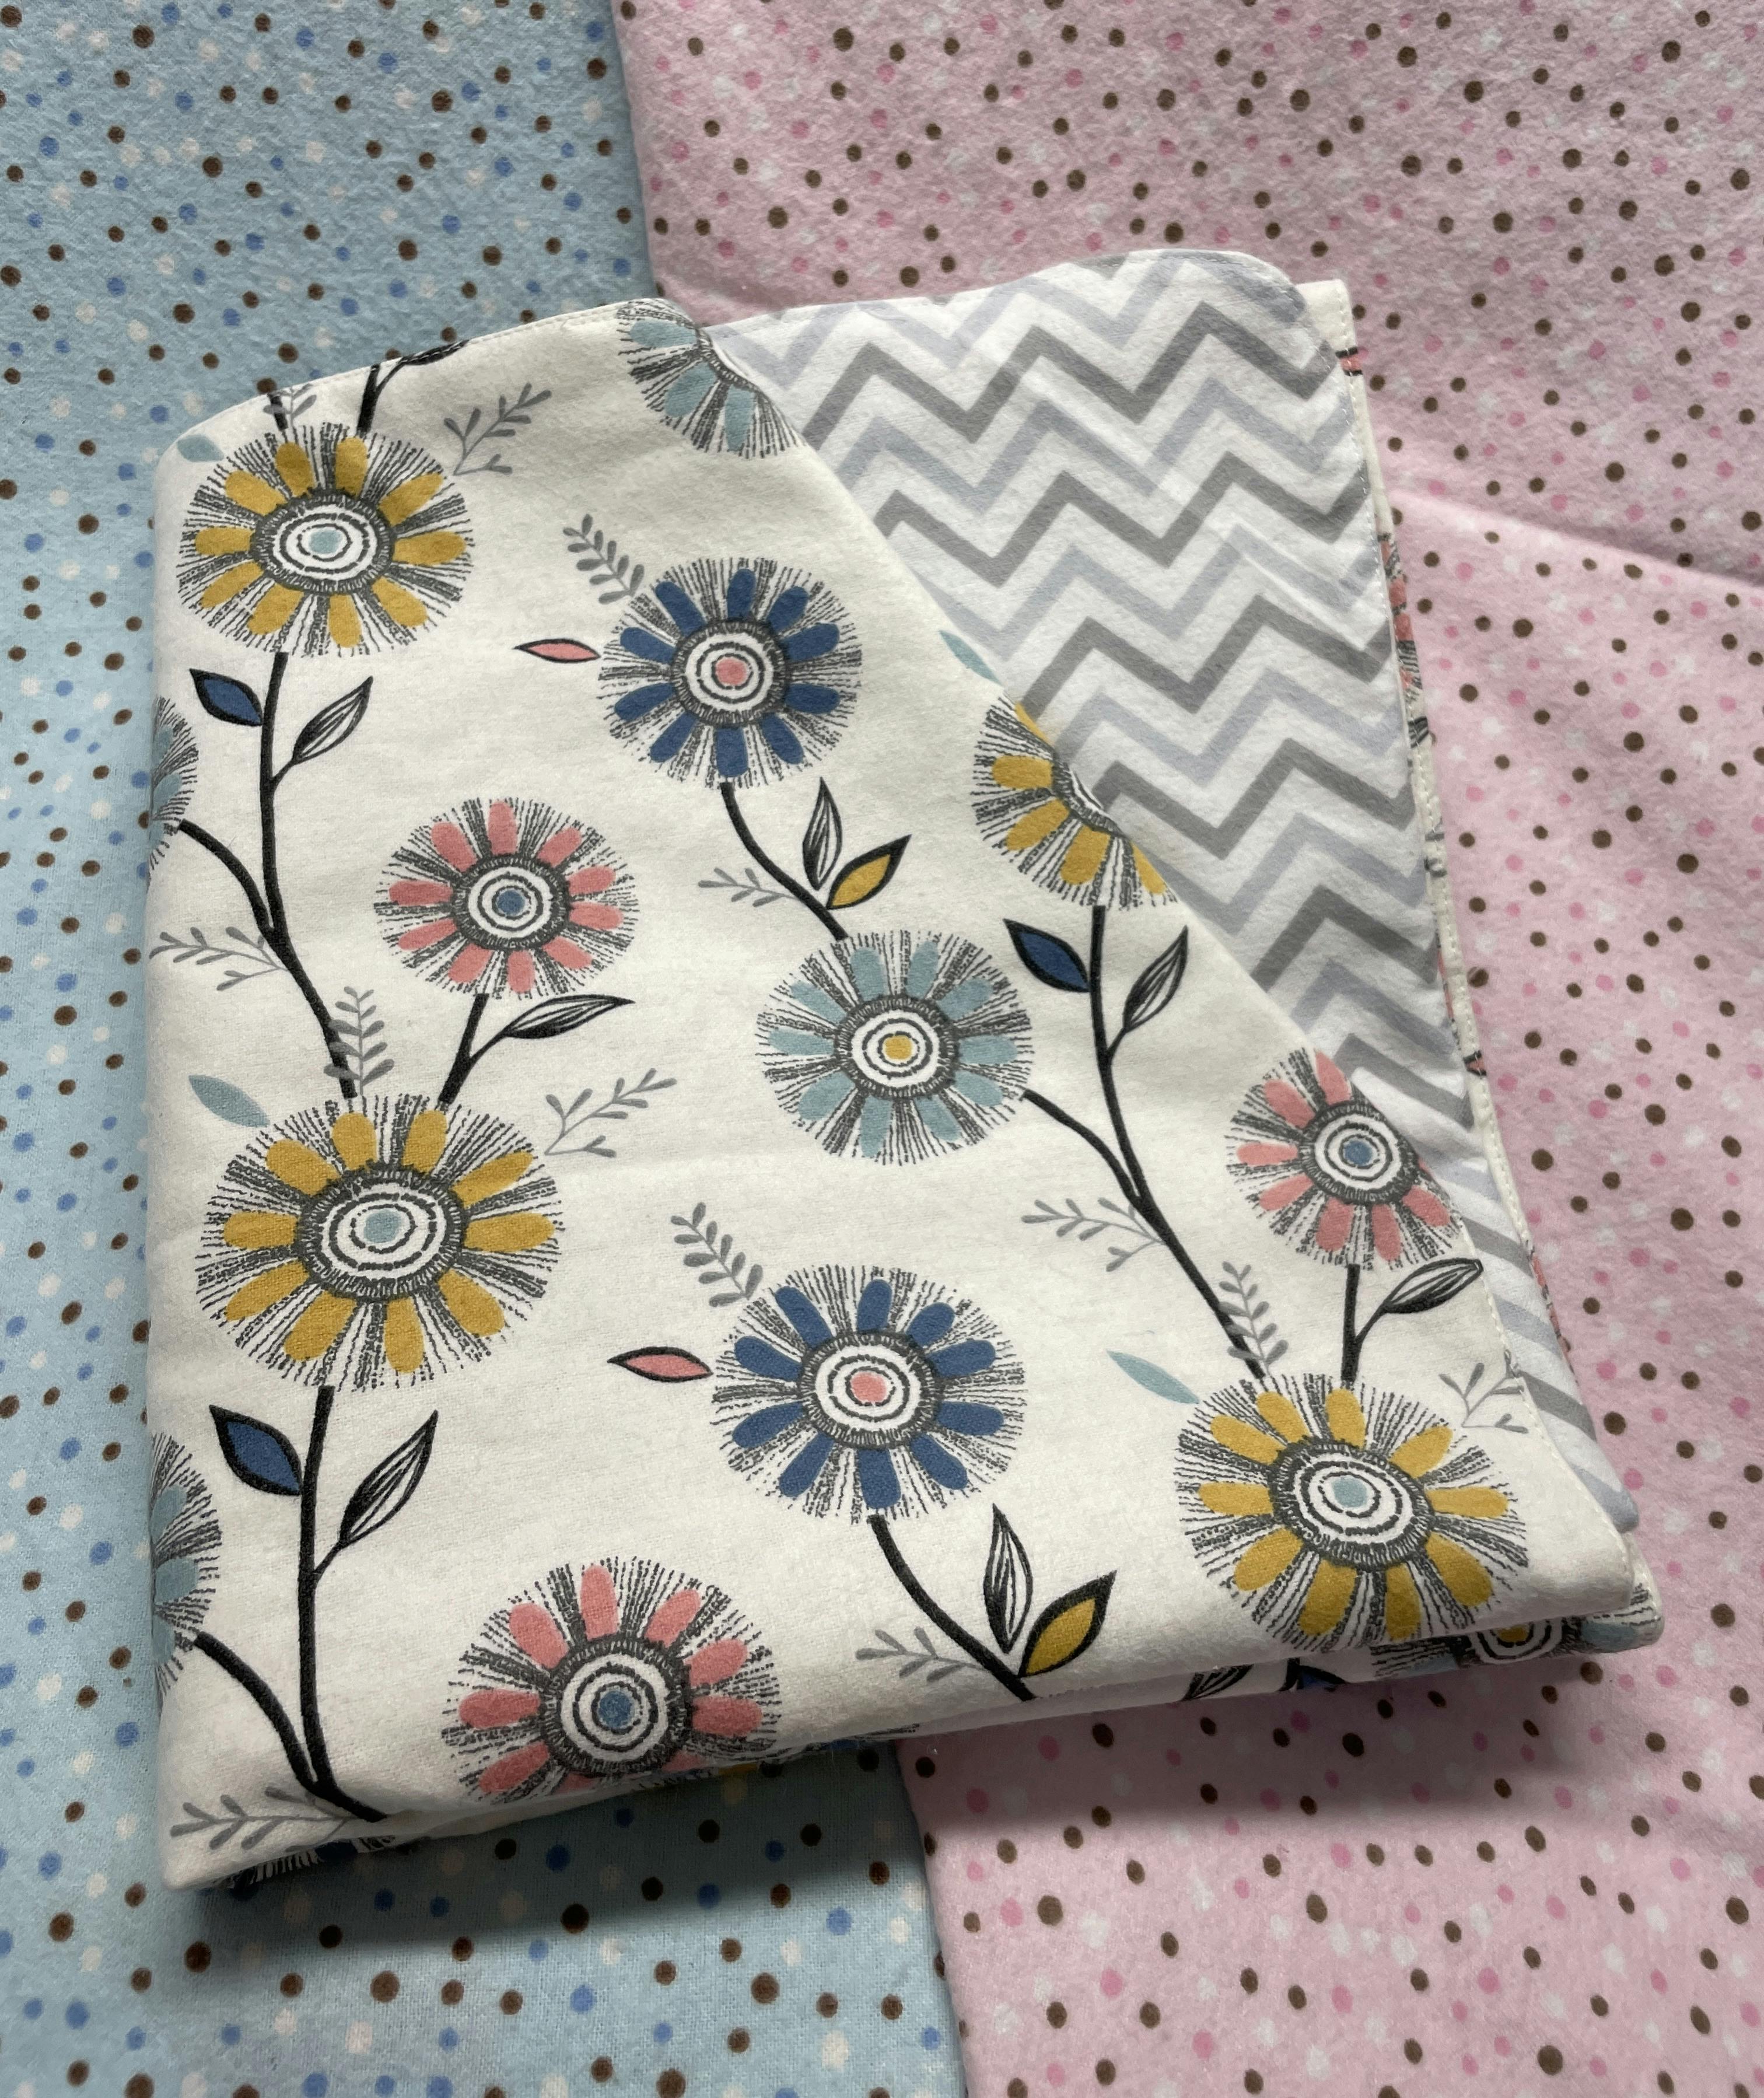 Double sided receiving baby blanket. 